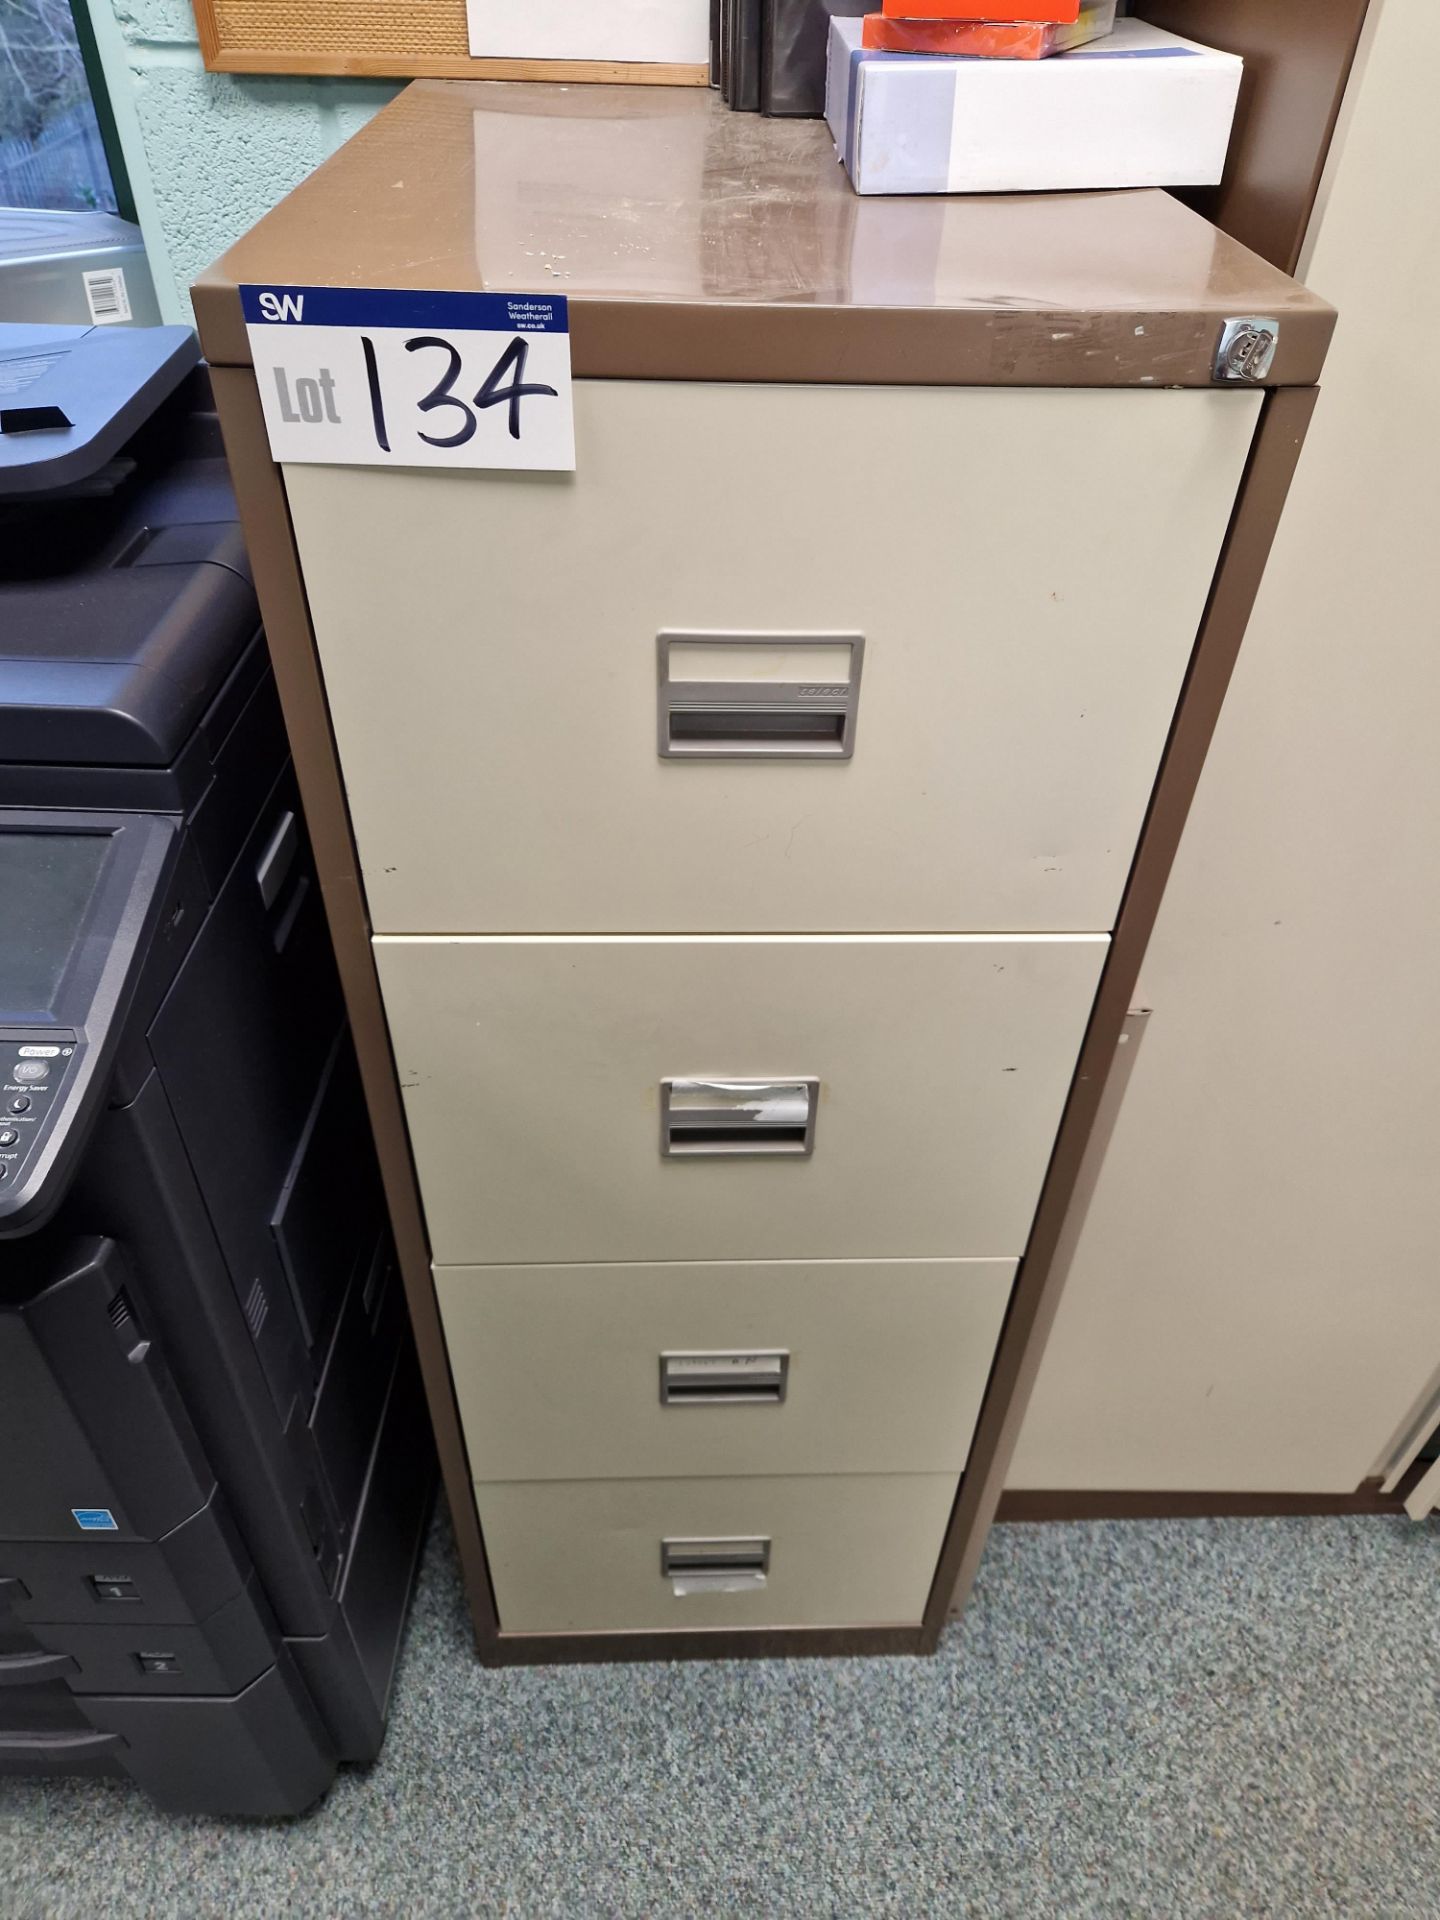 Two 4 Drawer Metal Filing Cabinets Please read the following important notes:- ***Overseas